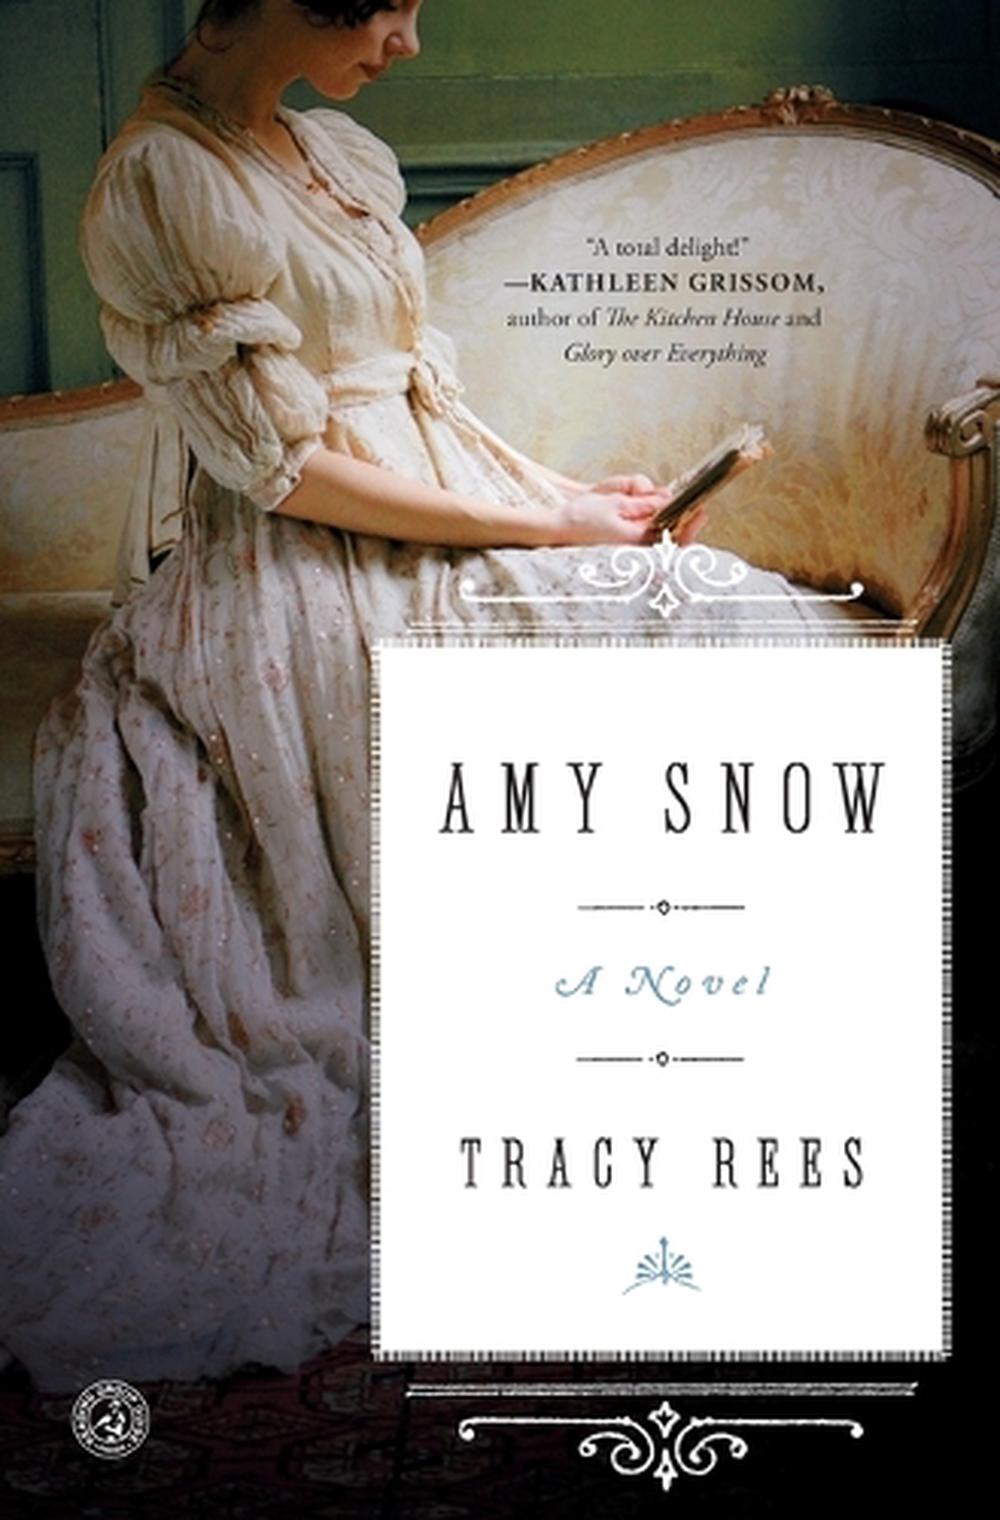 Amy Snow by Tracy Rees